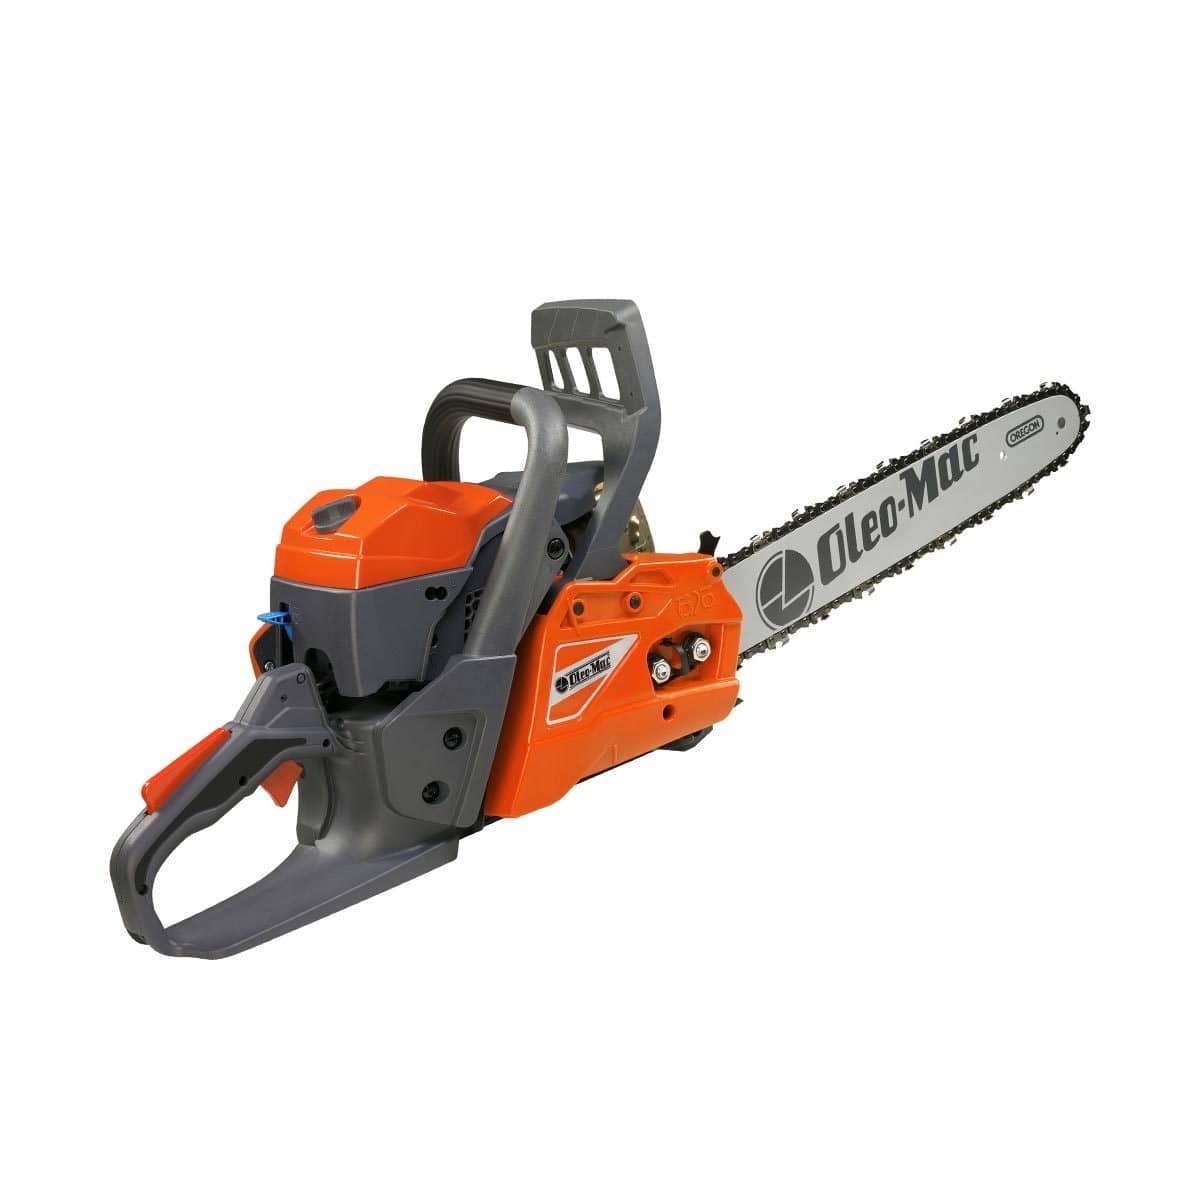 Oleo-Mac 2.4 HP Compact Chainsaw - GS 37 / GS 371 | Supply Master | Accra, Ghana Tools Building Steel Engineering Hardware tool